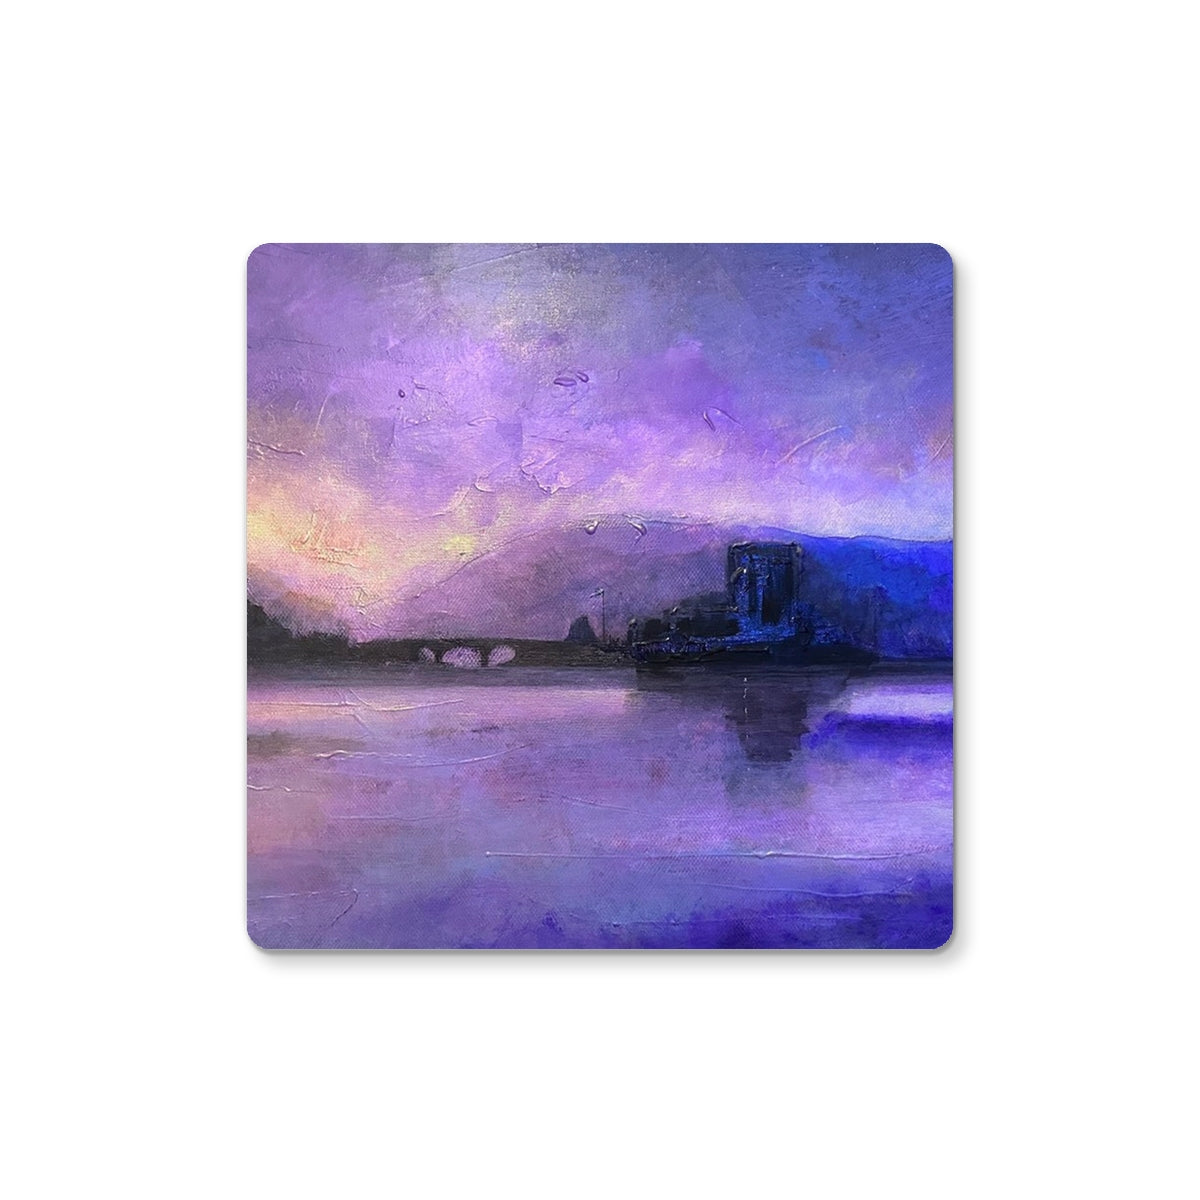 Eilean Donan Castle Moonset Art Gifts Coaster-Coasters-Historic & Iconic Scotland Art Gallery-4 Coasters-Paintings, Prints, Homeware, Art Gifts From Scotland By Scottish Artist Kevin Hunter